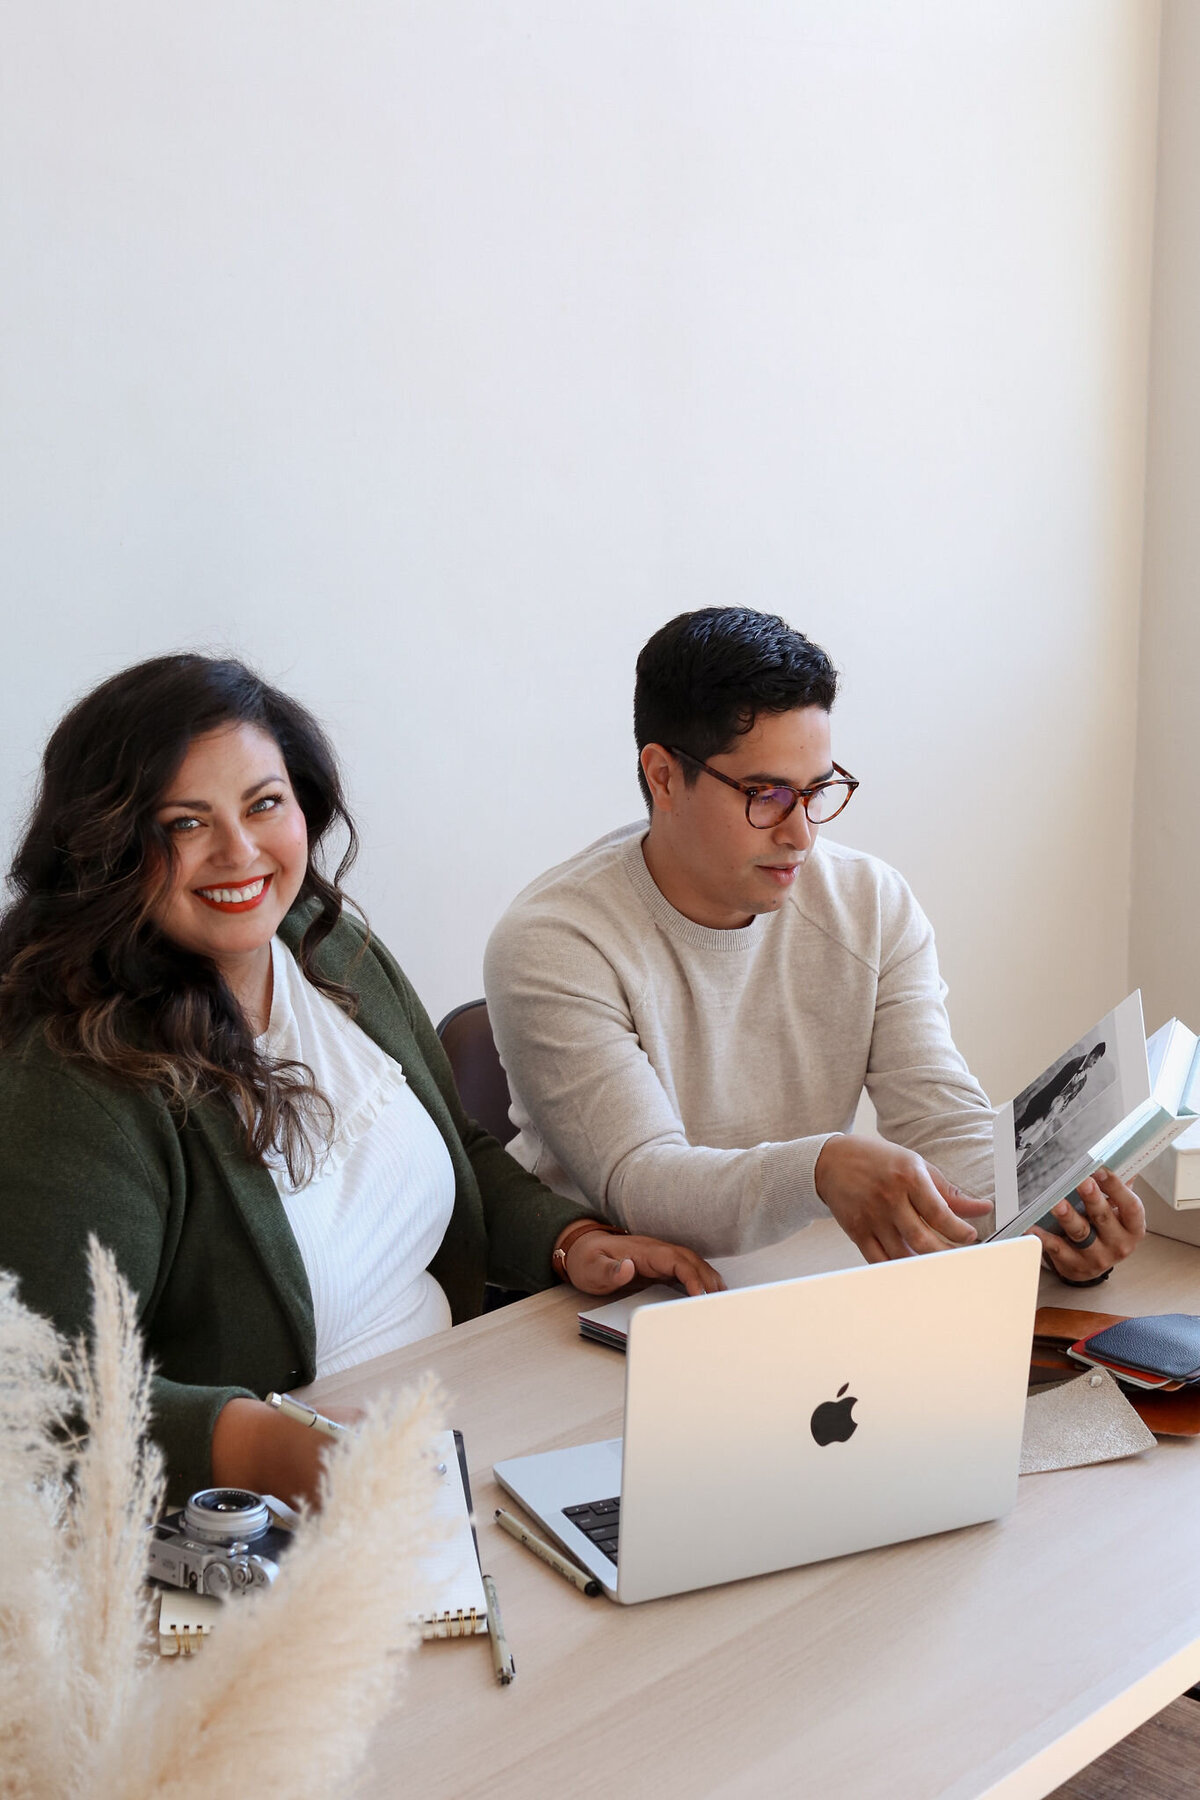 Smiling woman with lip stick  looking at camera wearing green sweater and white blouse sitting next to  man wearing light tan sweater wearing glasses looking at wedding album that he is holding- Romero Album Design